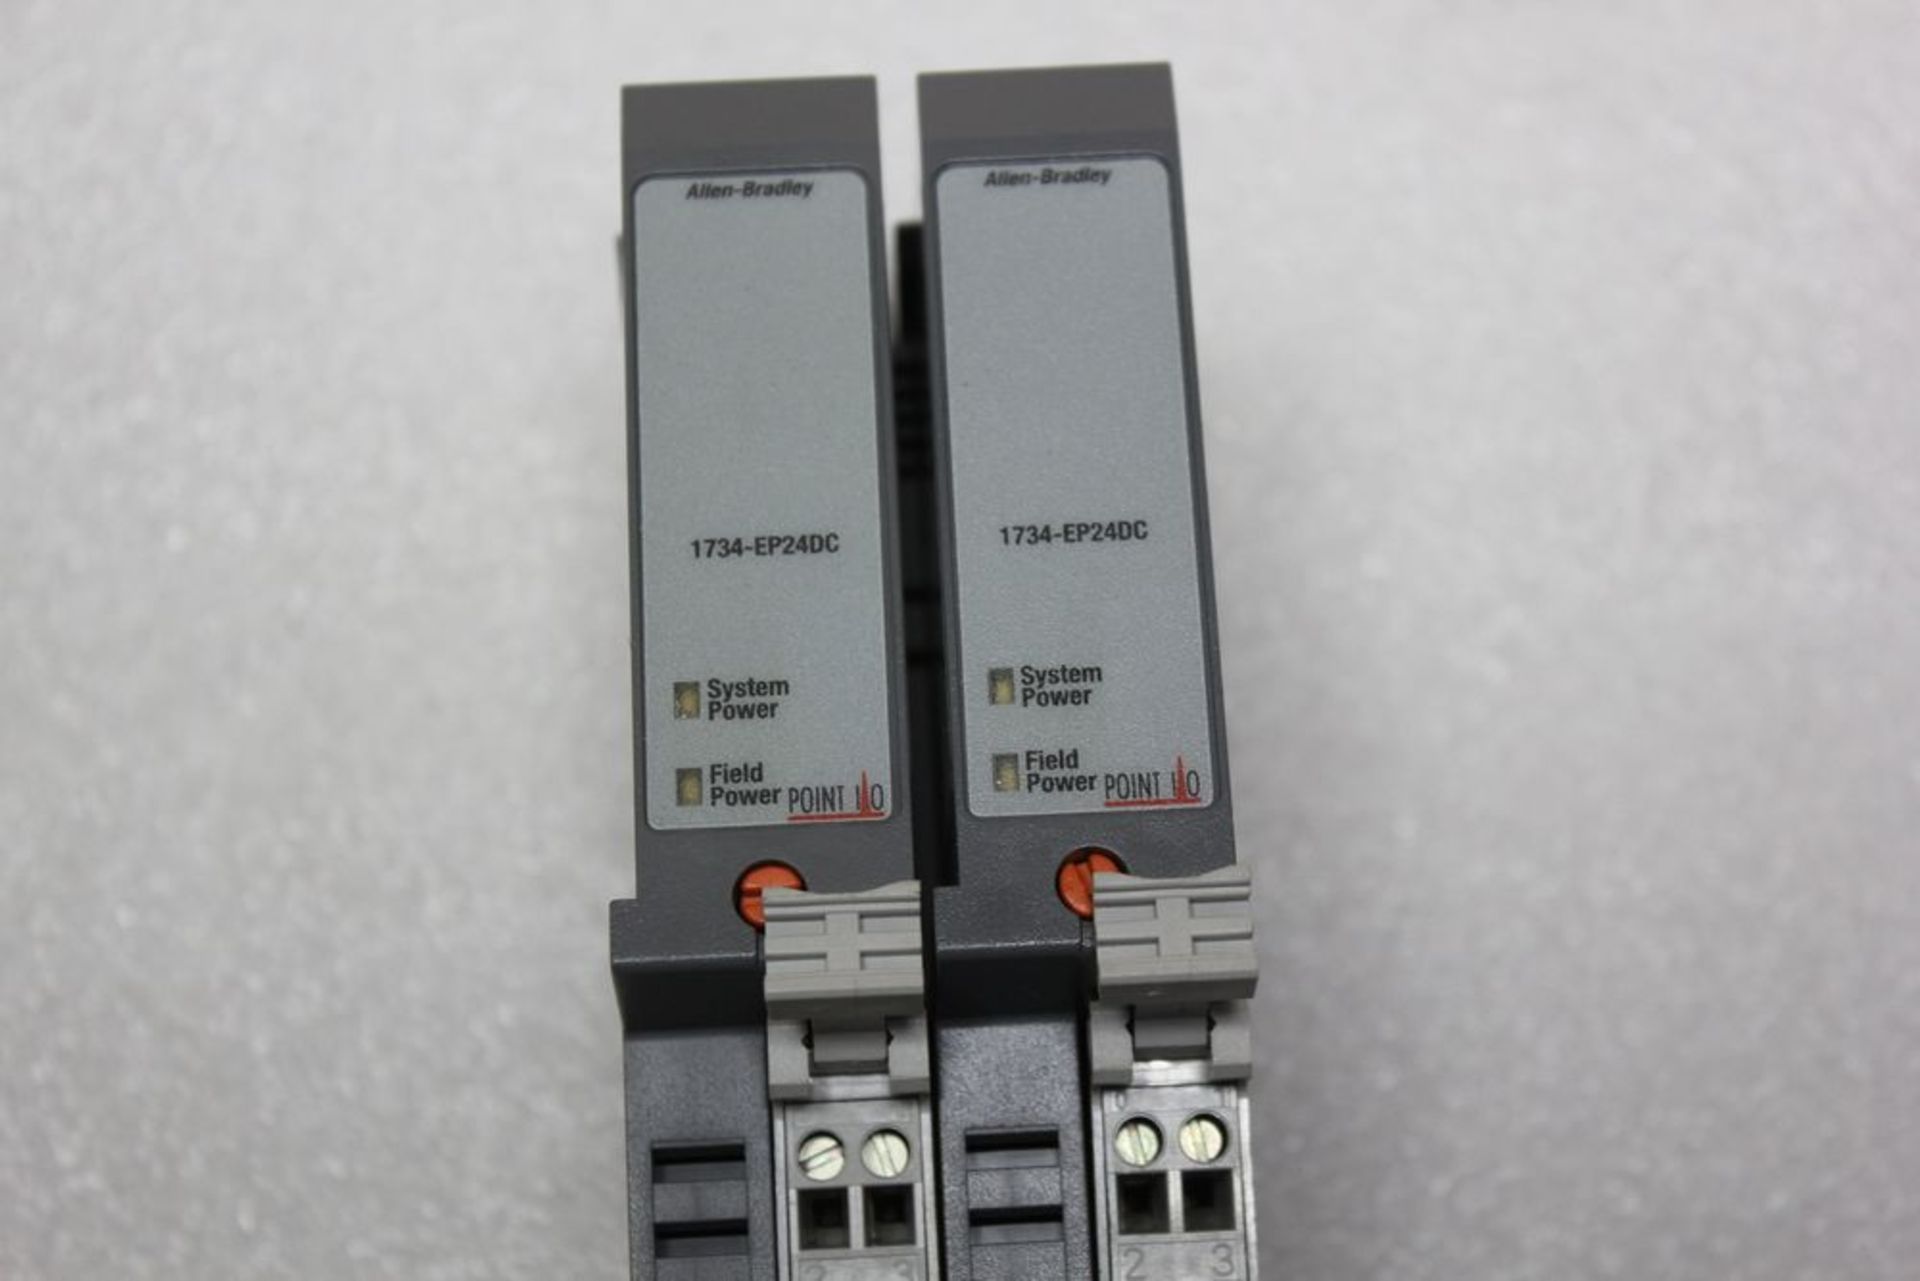 LOT OF ALLEN BRADLEY POINT I/O POWER SUPPLY MODULES - Image 2 of 4